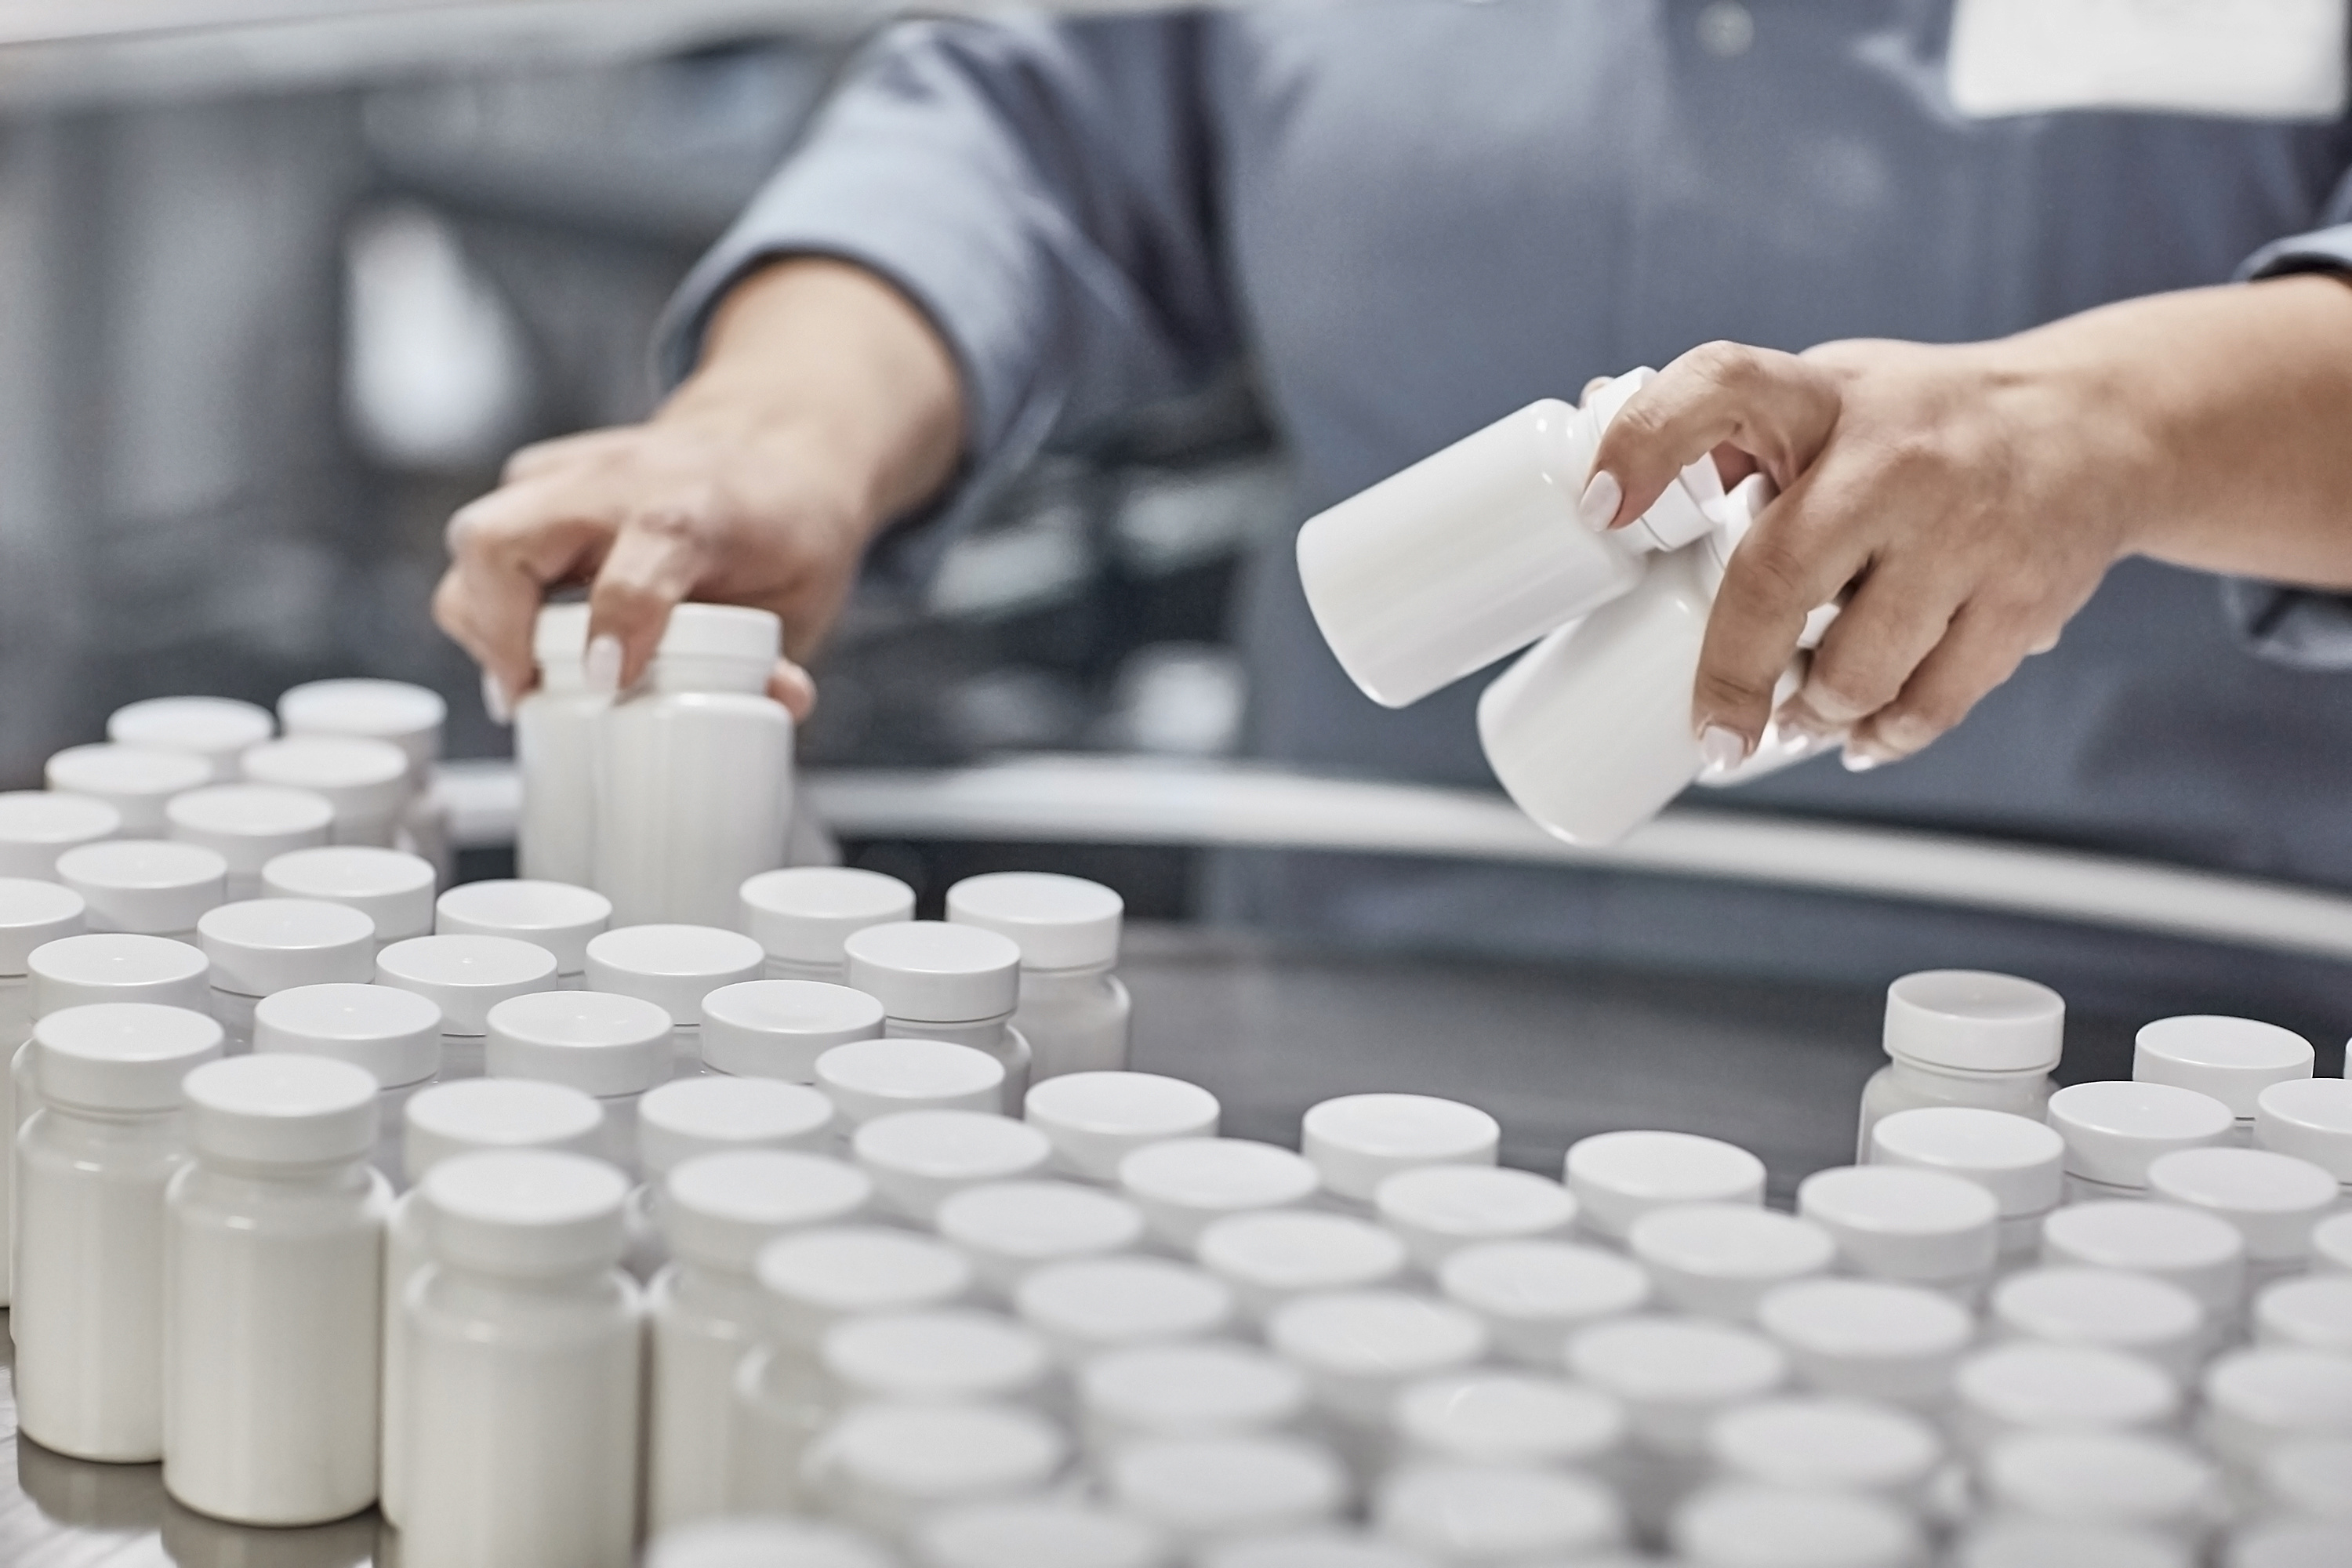 How This Current Pandemic Changed Product Packaging Testing For ...